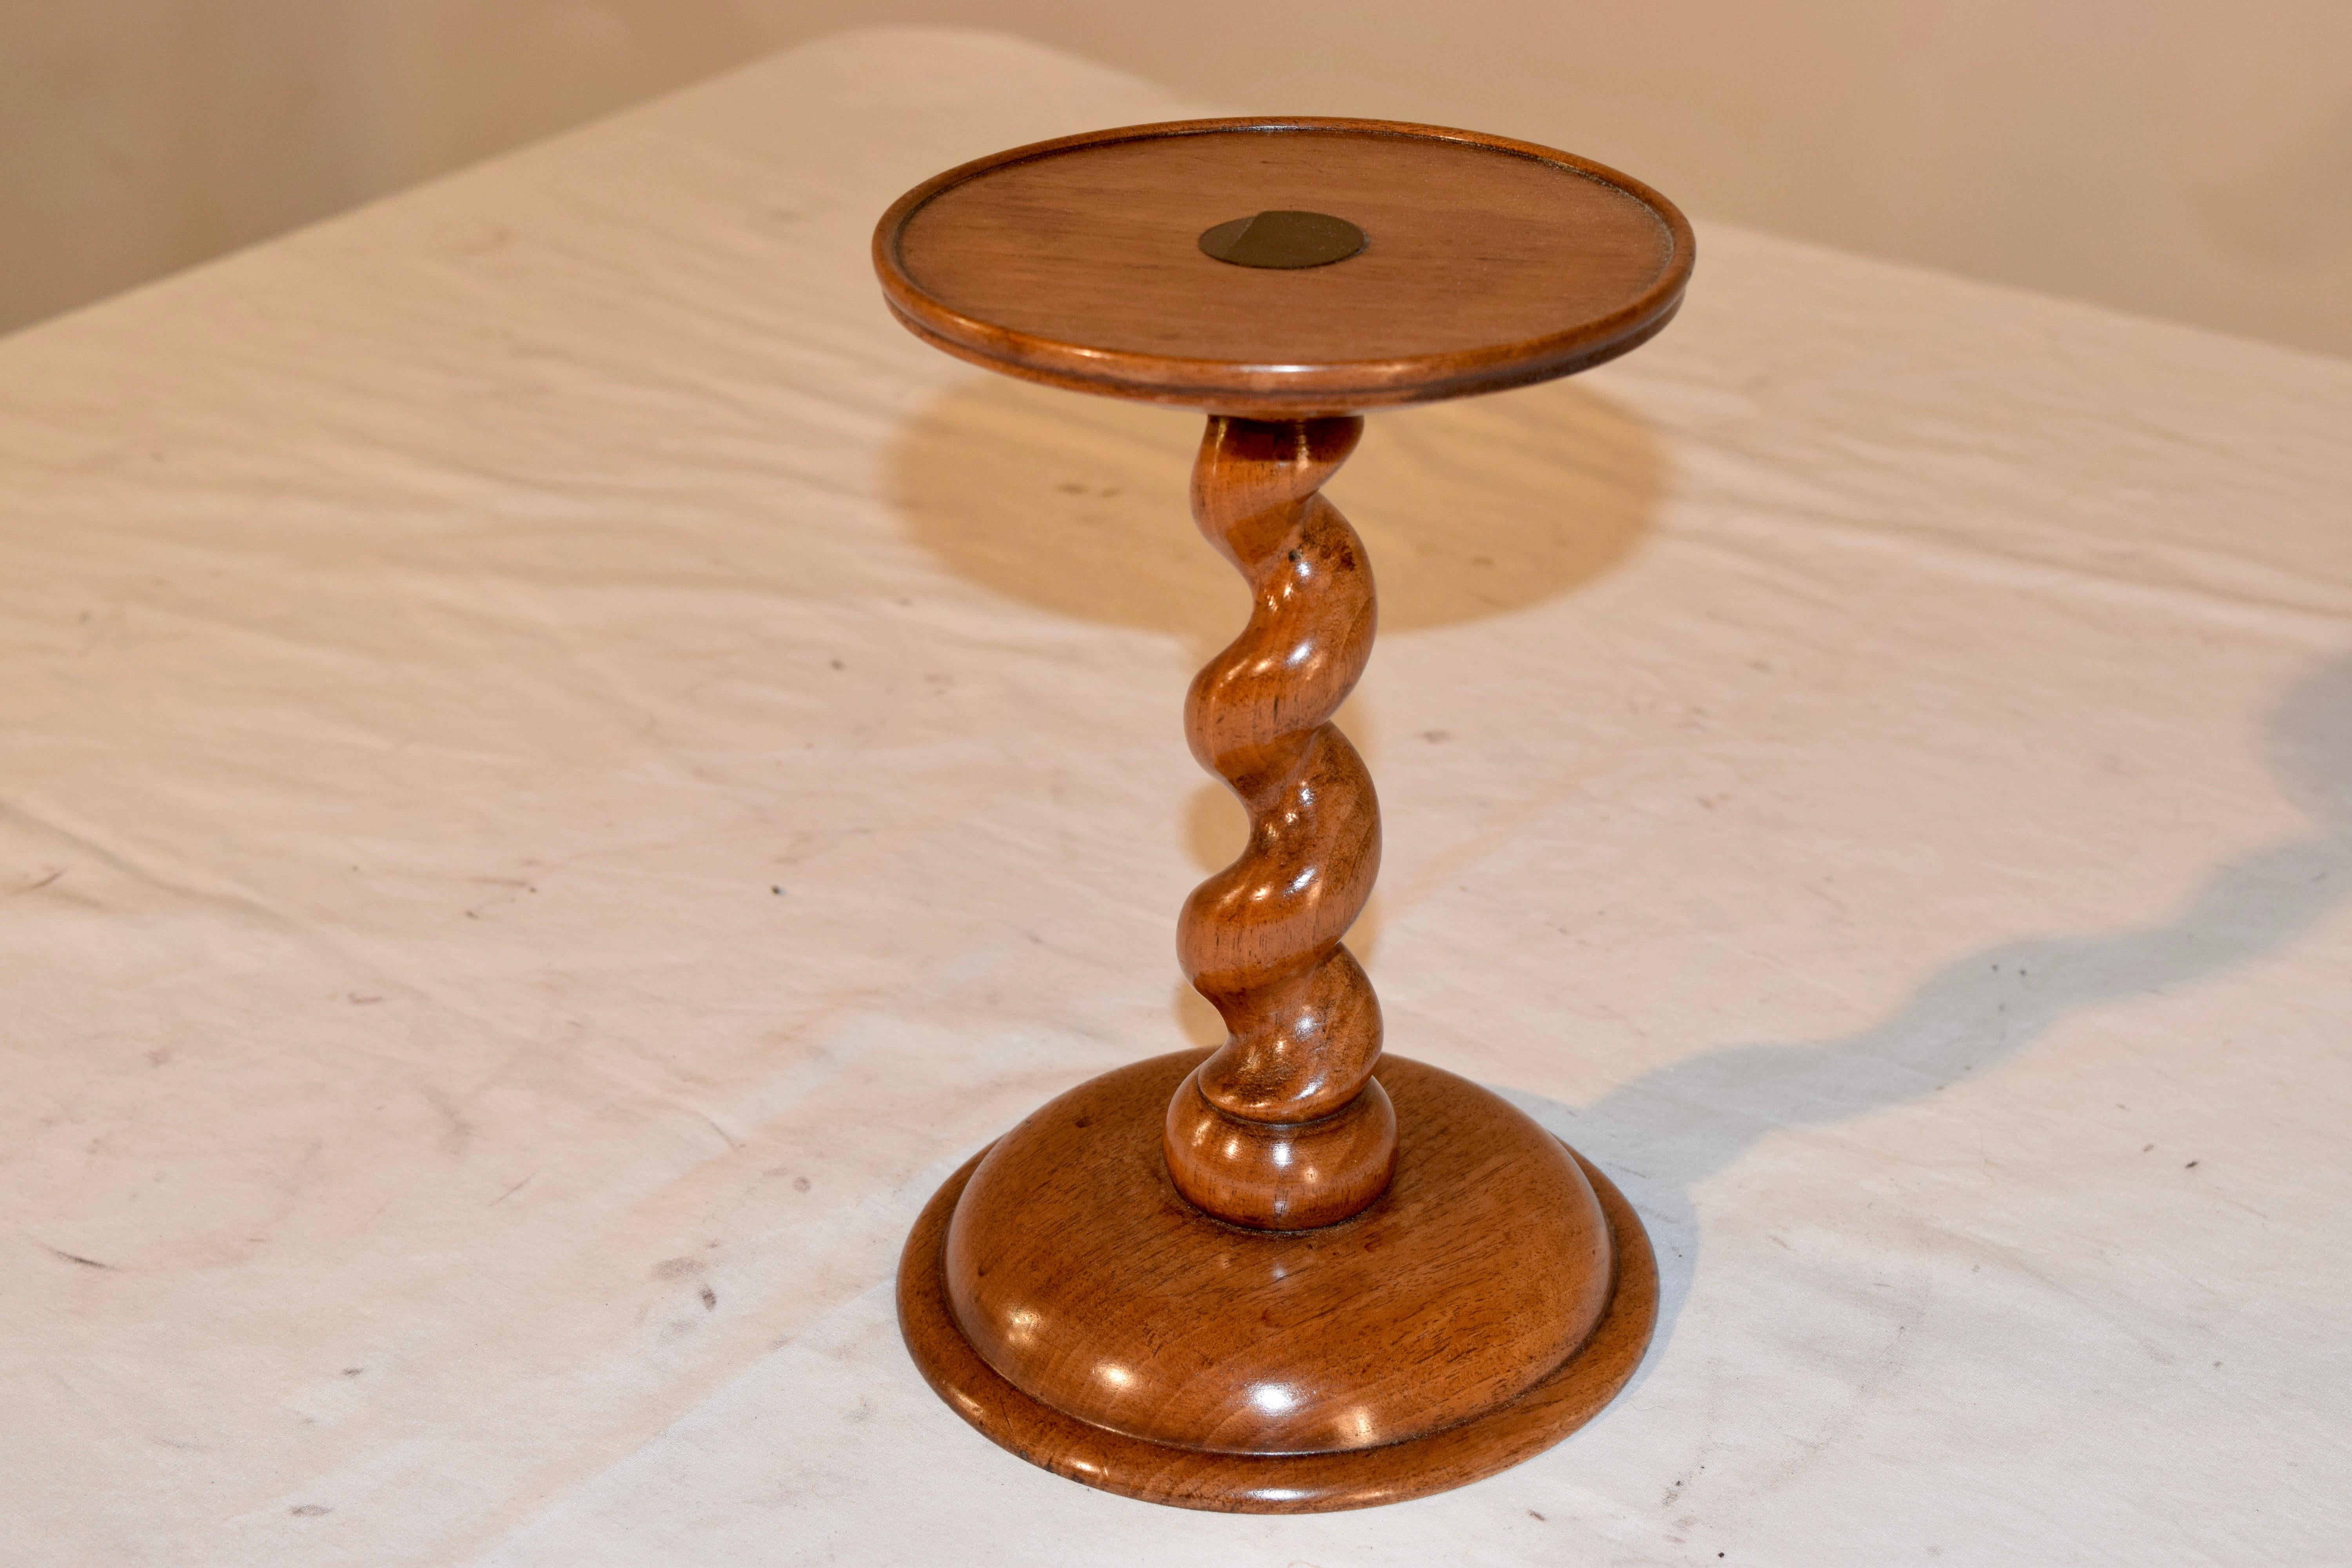 19th century small oak pedestal from England with a hand-turned dish top, supported on a hand-turned barley twist stem and resting on a hand-turned base with a molded edge.